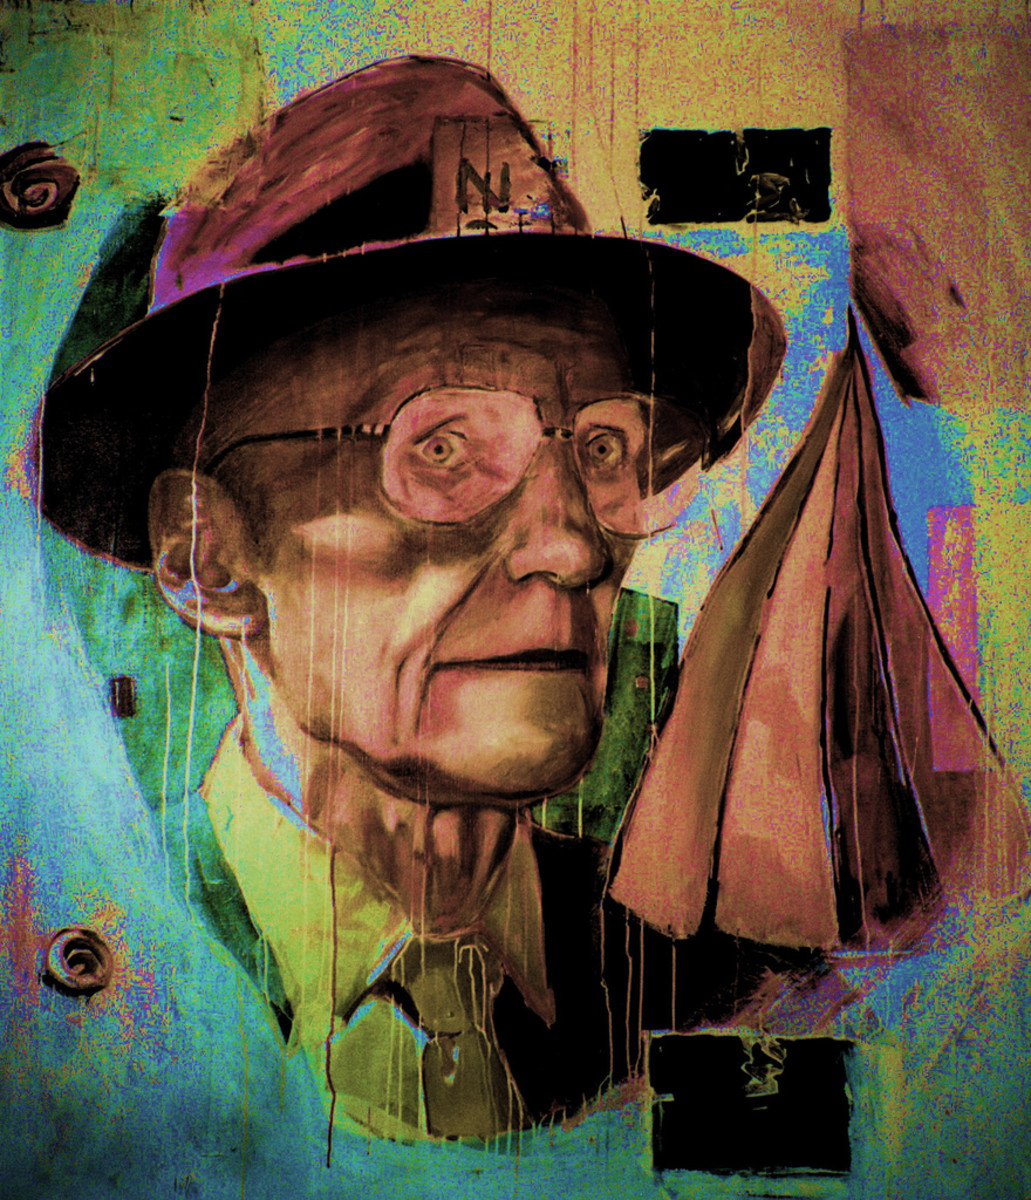 analyzing-subconscious-themes-in-william-s-burroughs-novel-junky